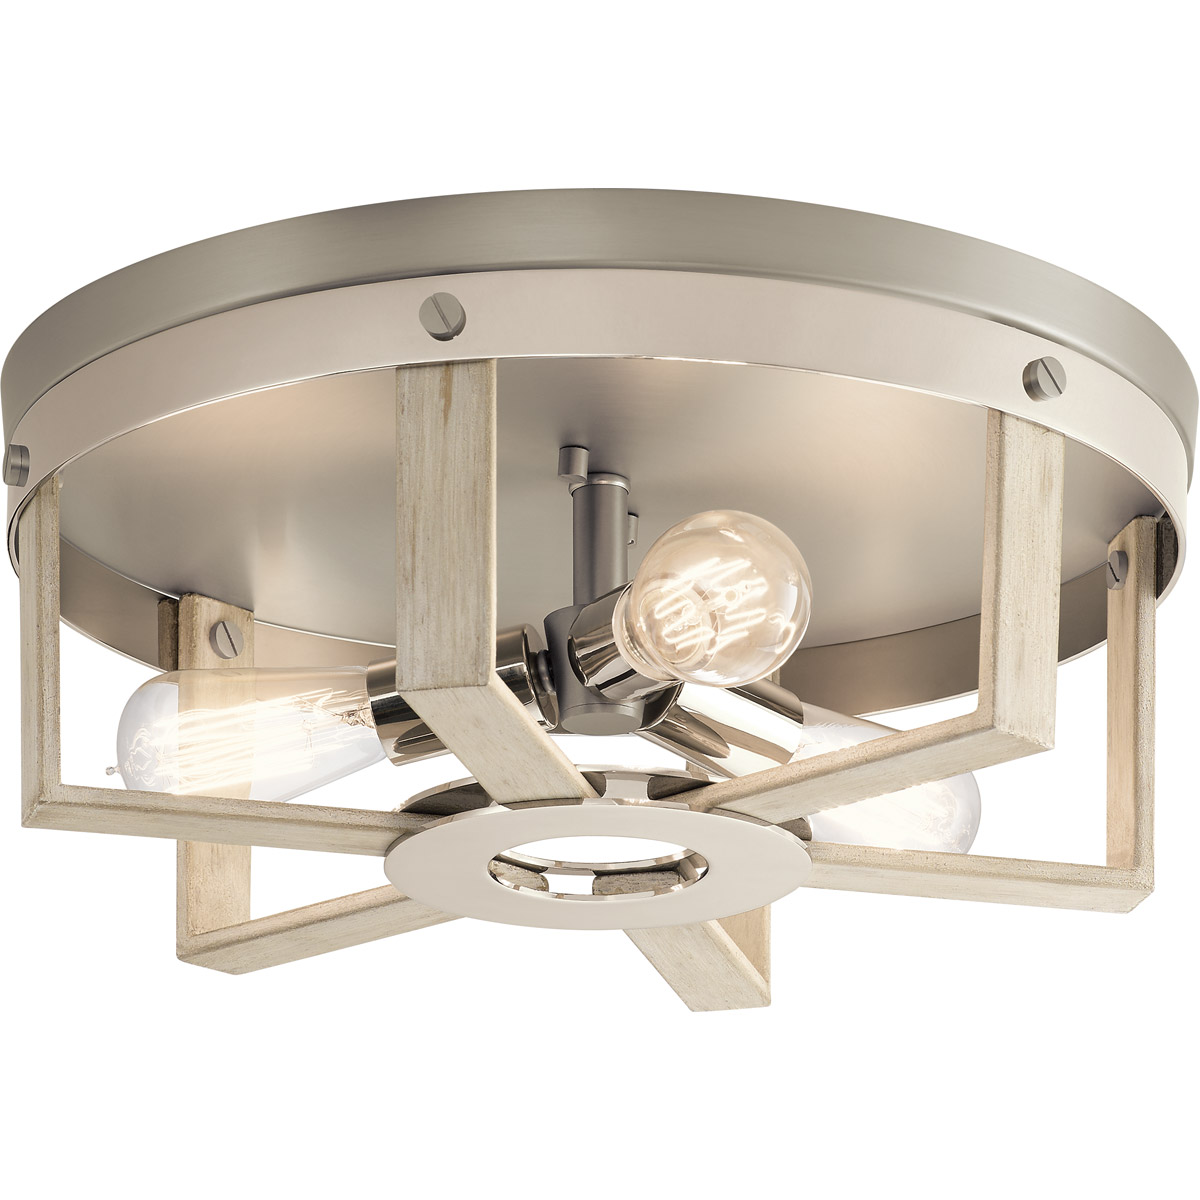 Dorset 16-inch 3-Light Semi Flush Mount Light Fixture with White Linen  Shade and Polished Nickel Finish